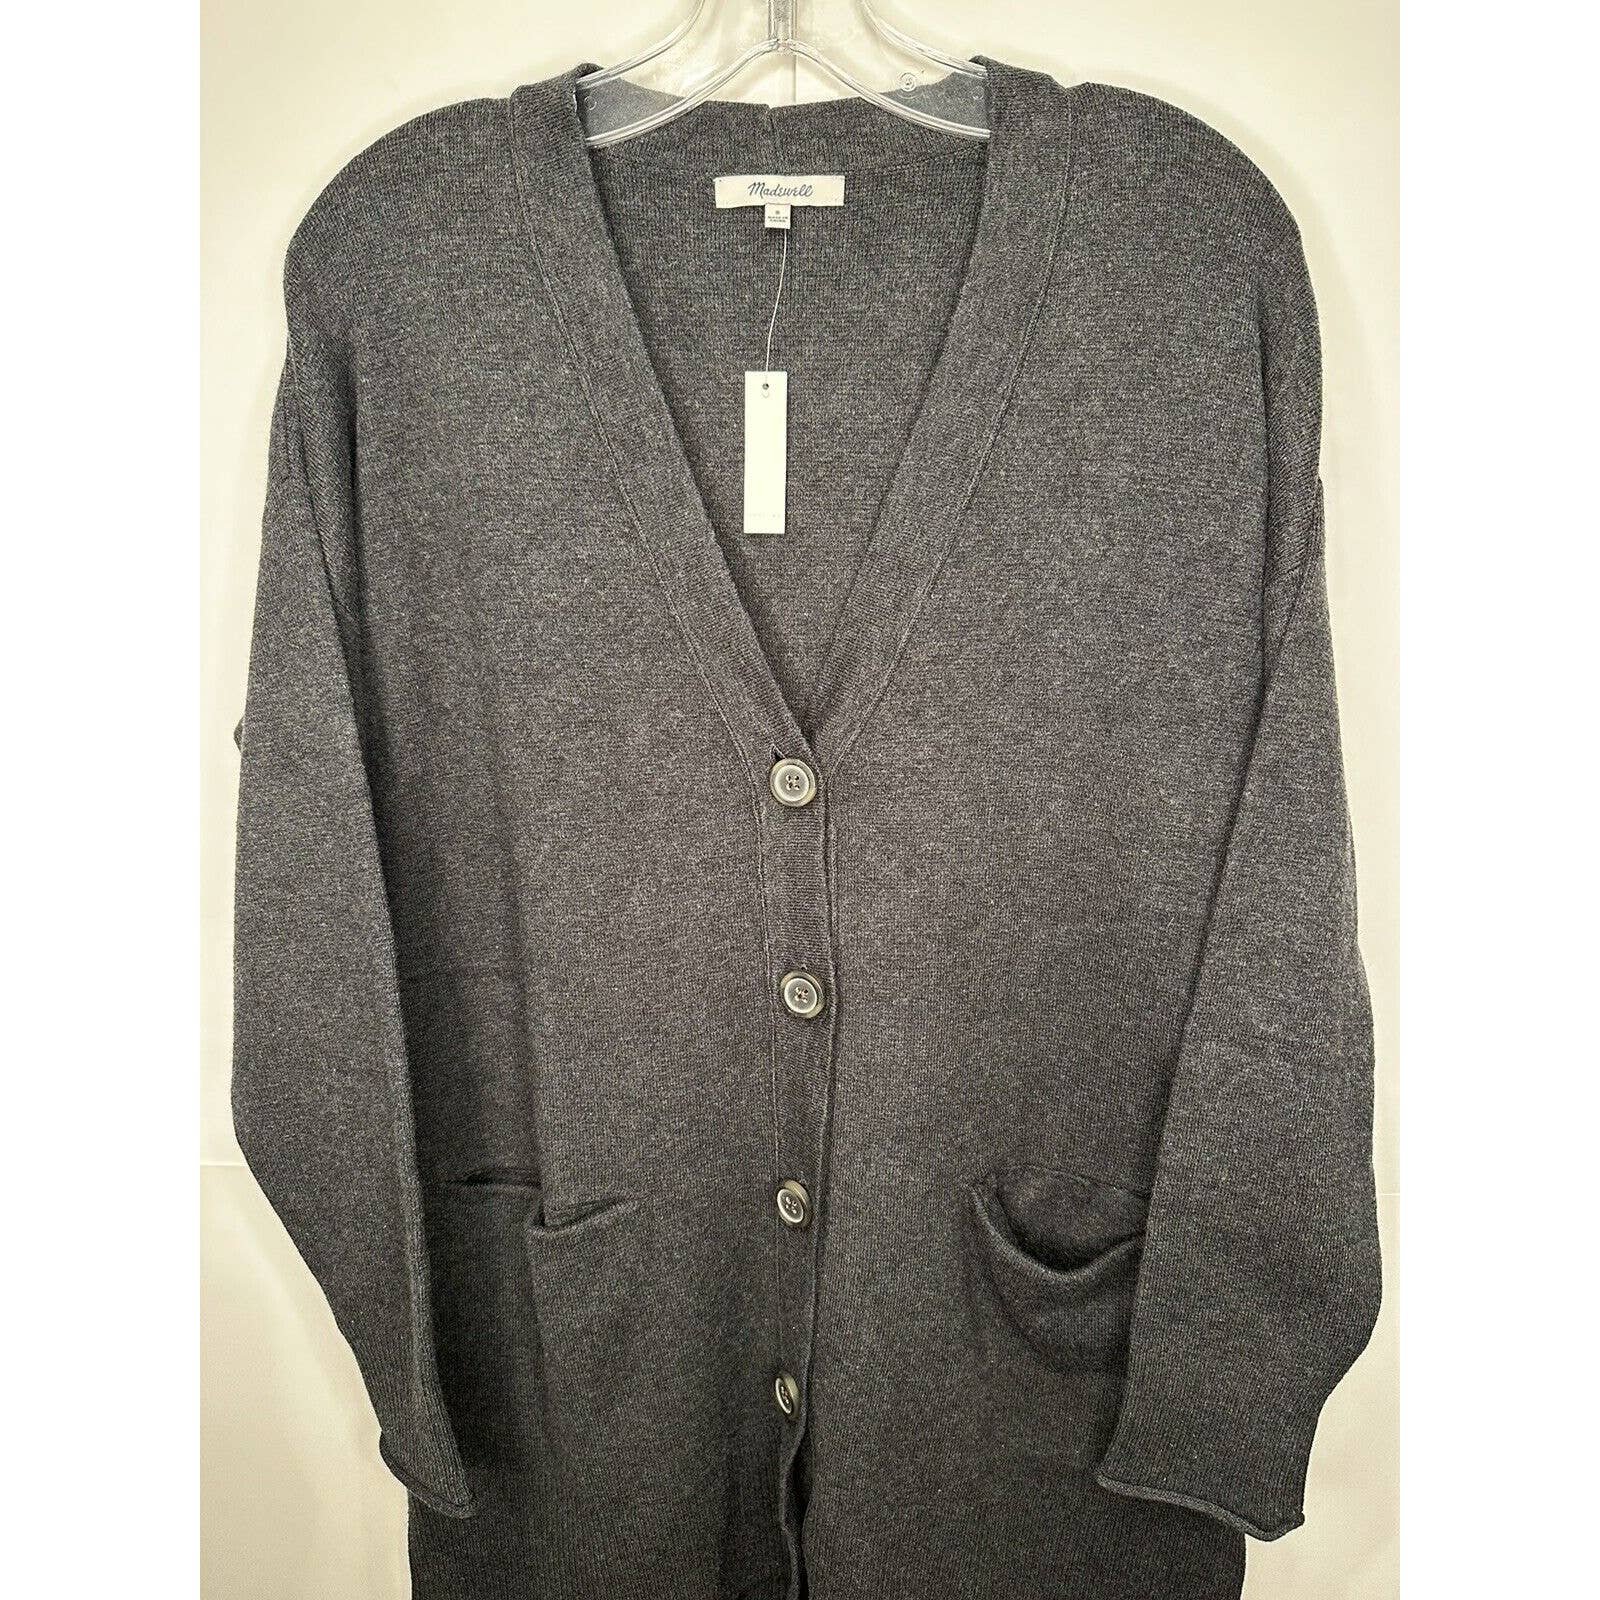 Buy Madewell Cardigan Sweater Button Up Size Small Wome